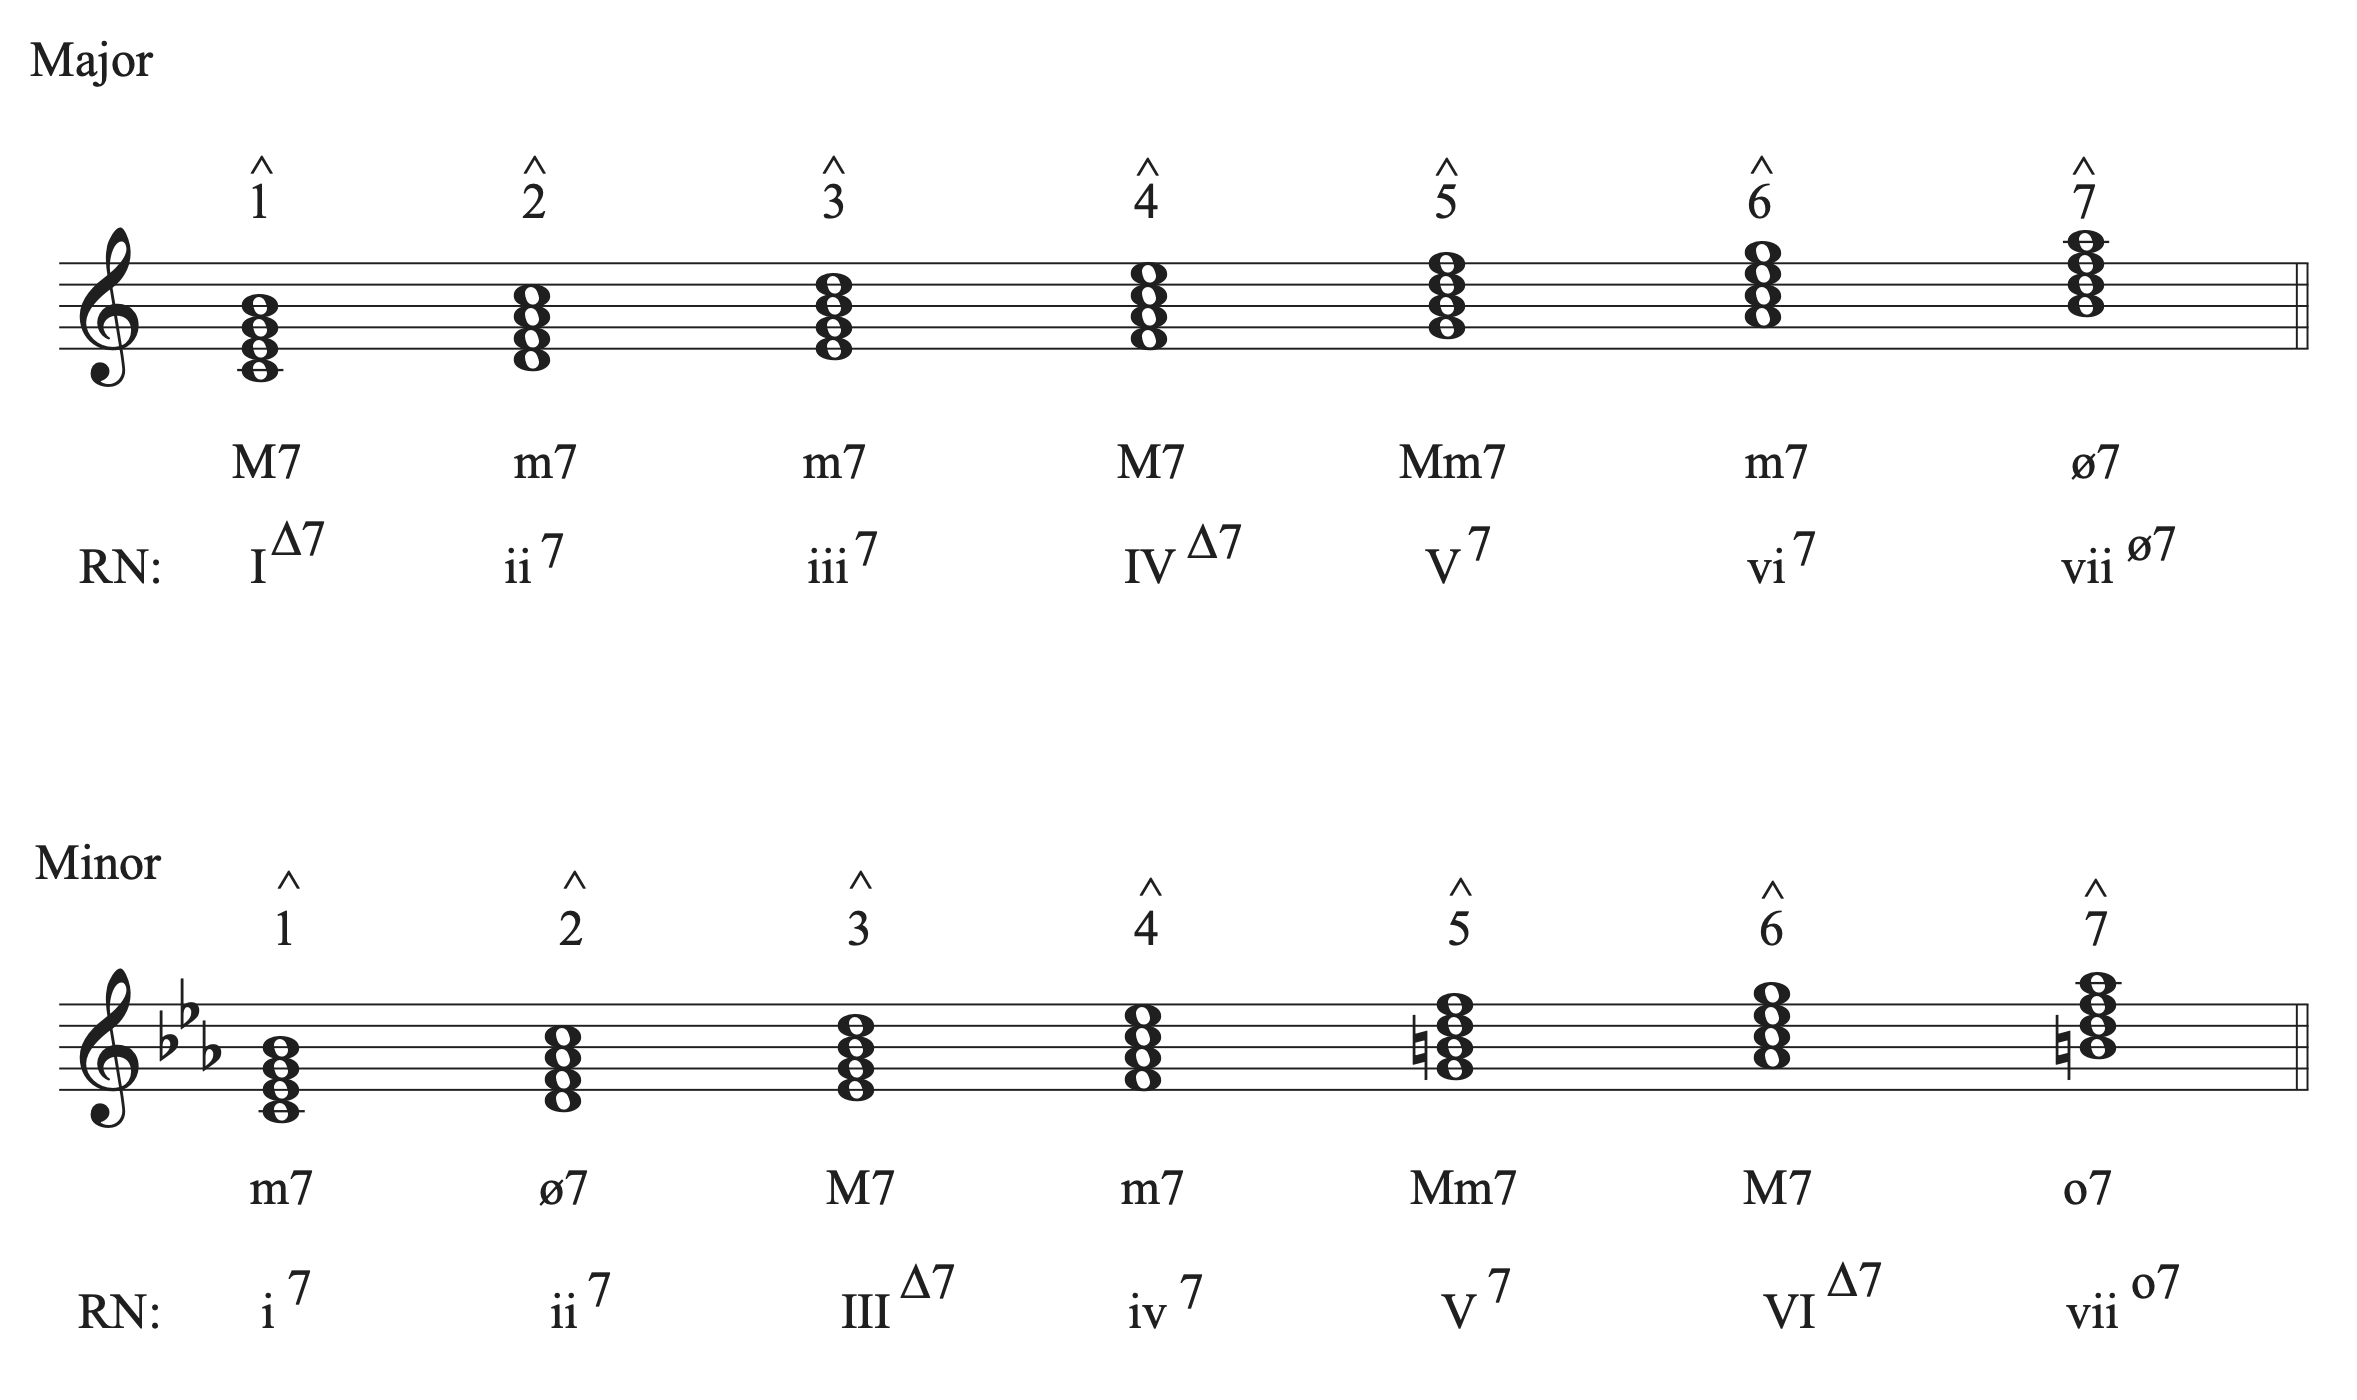 Chart showing the Roman Numerals for seventh chords built on each scale degree in a major and minor key.